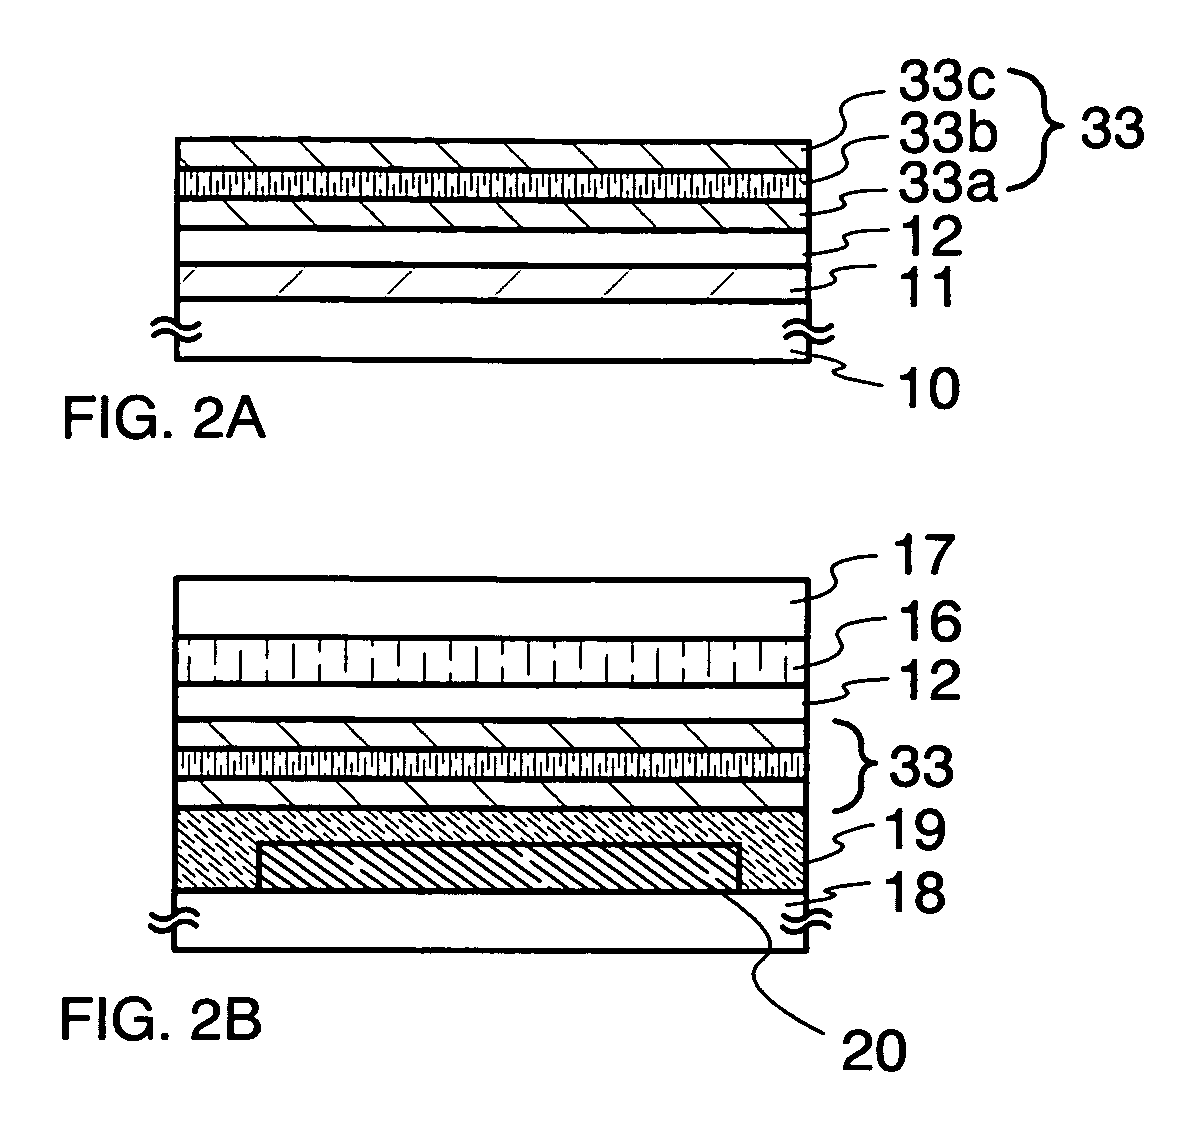 Semiconductor device, method of manufacturing thereof, and method of manufacturing base material